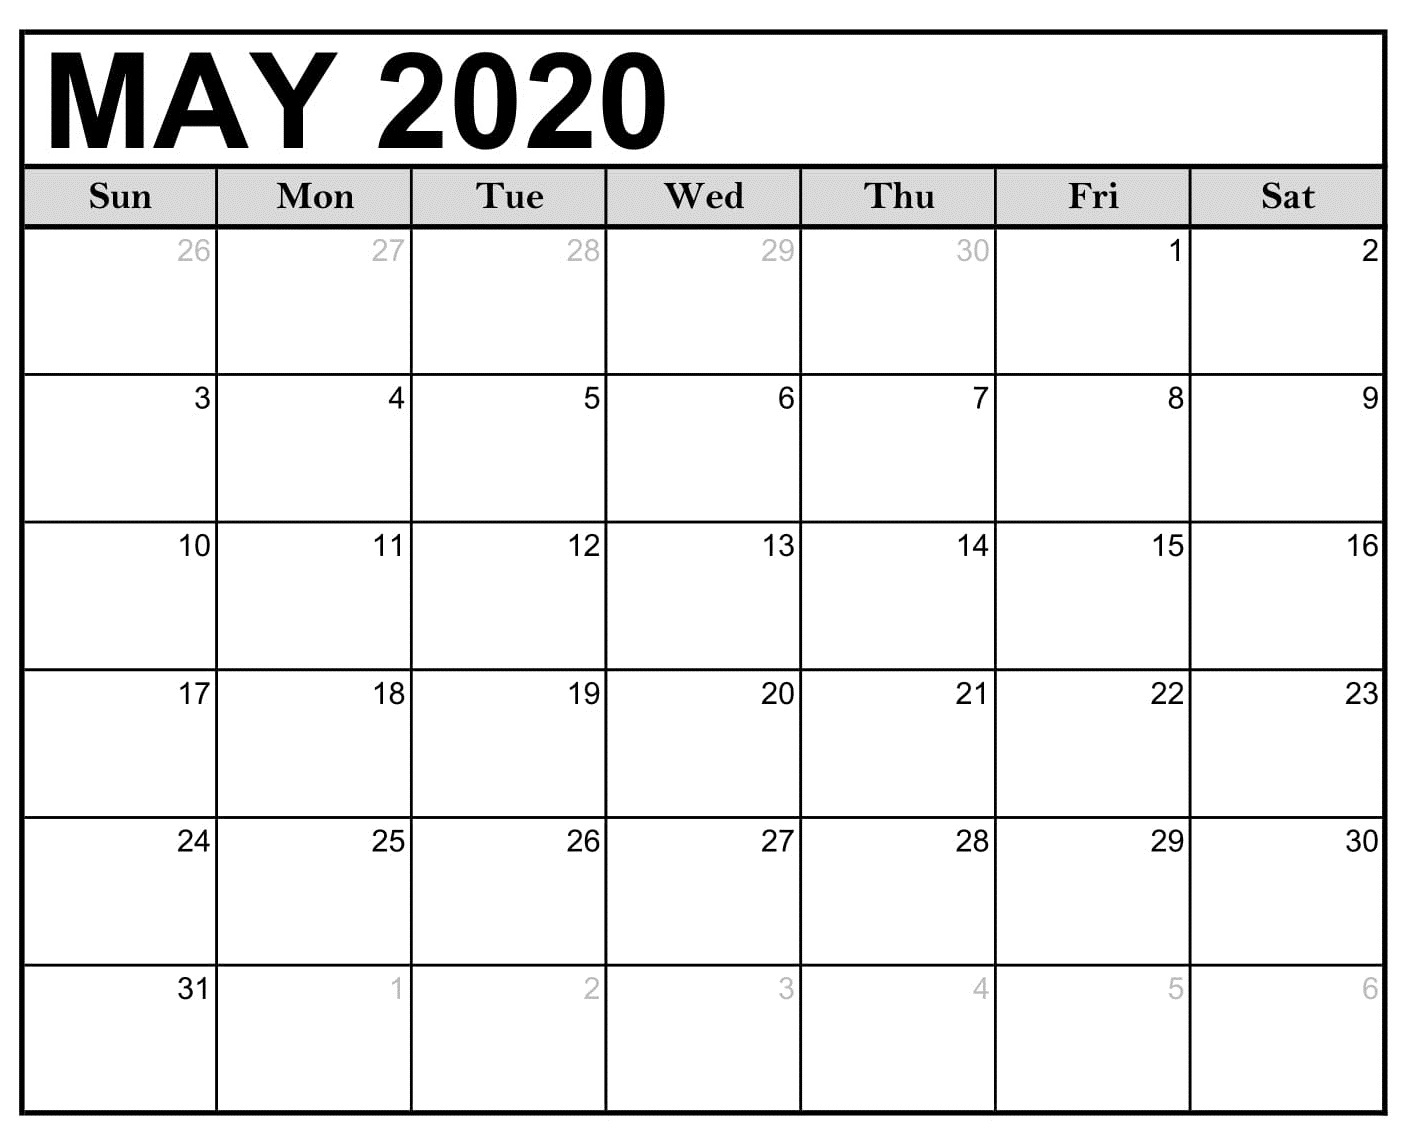 May 2020 Monthly Calendar